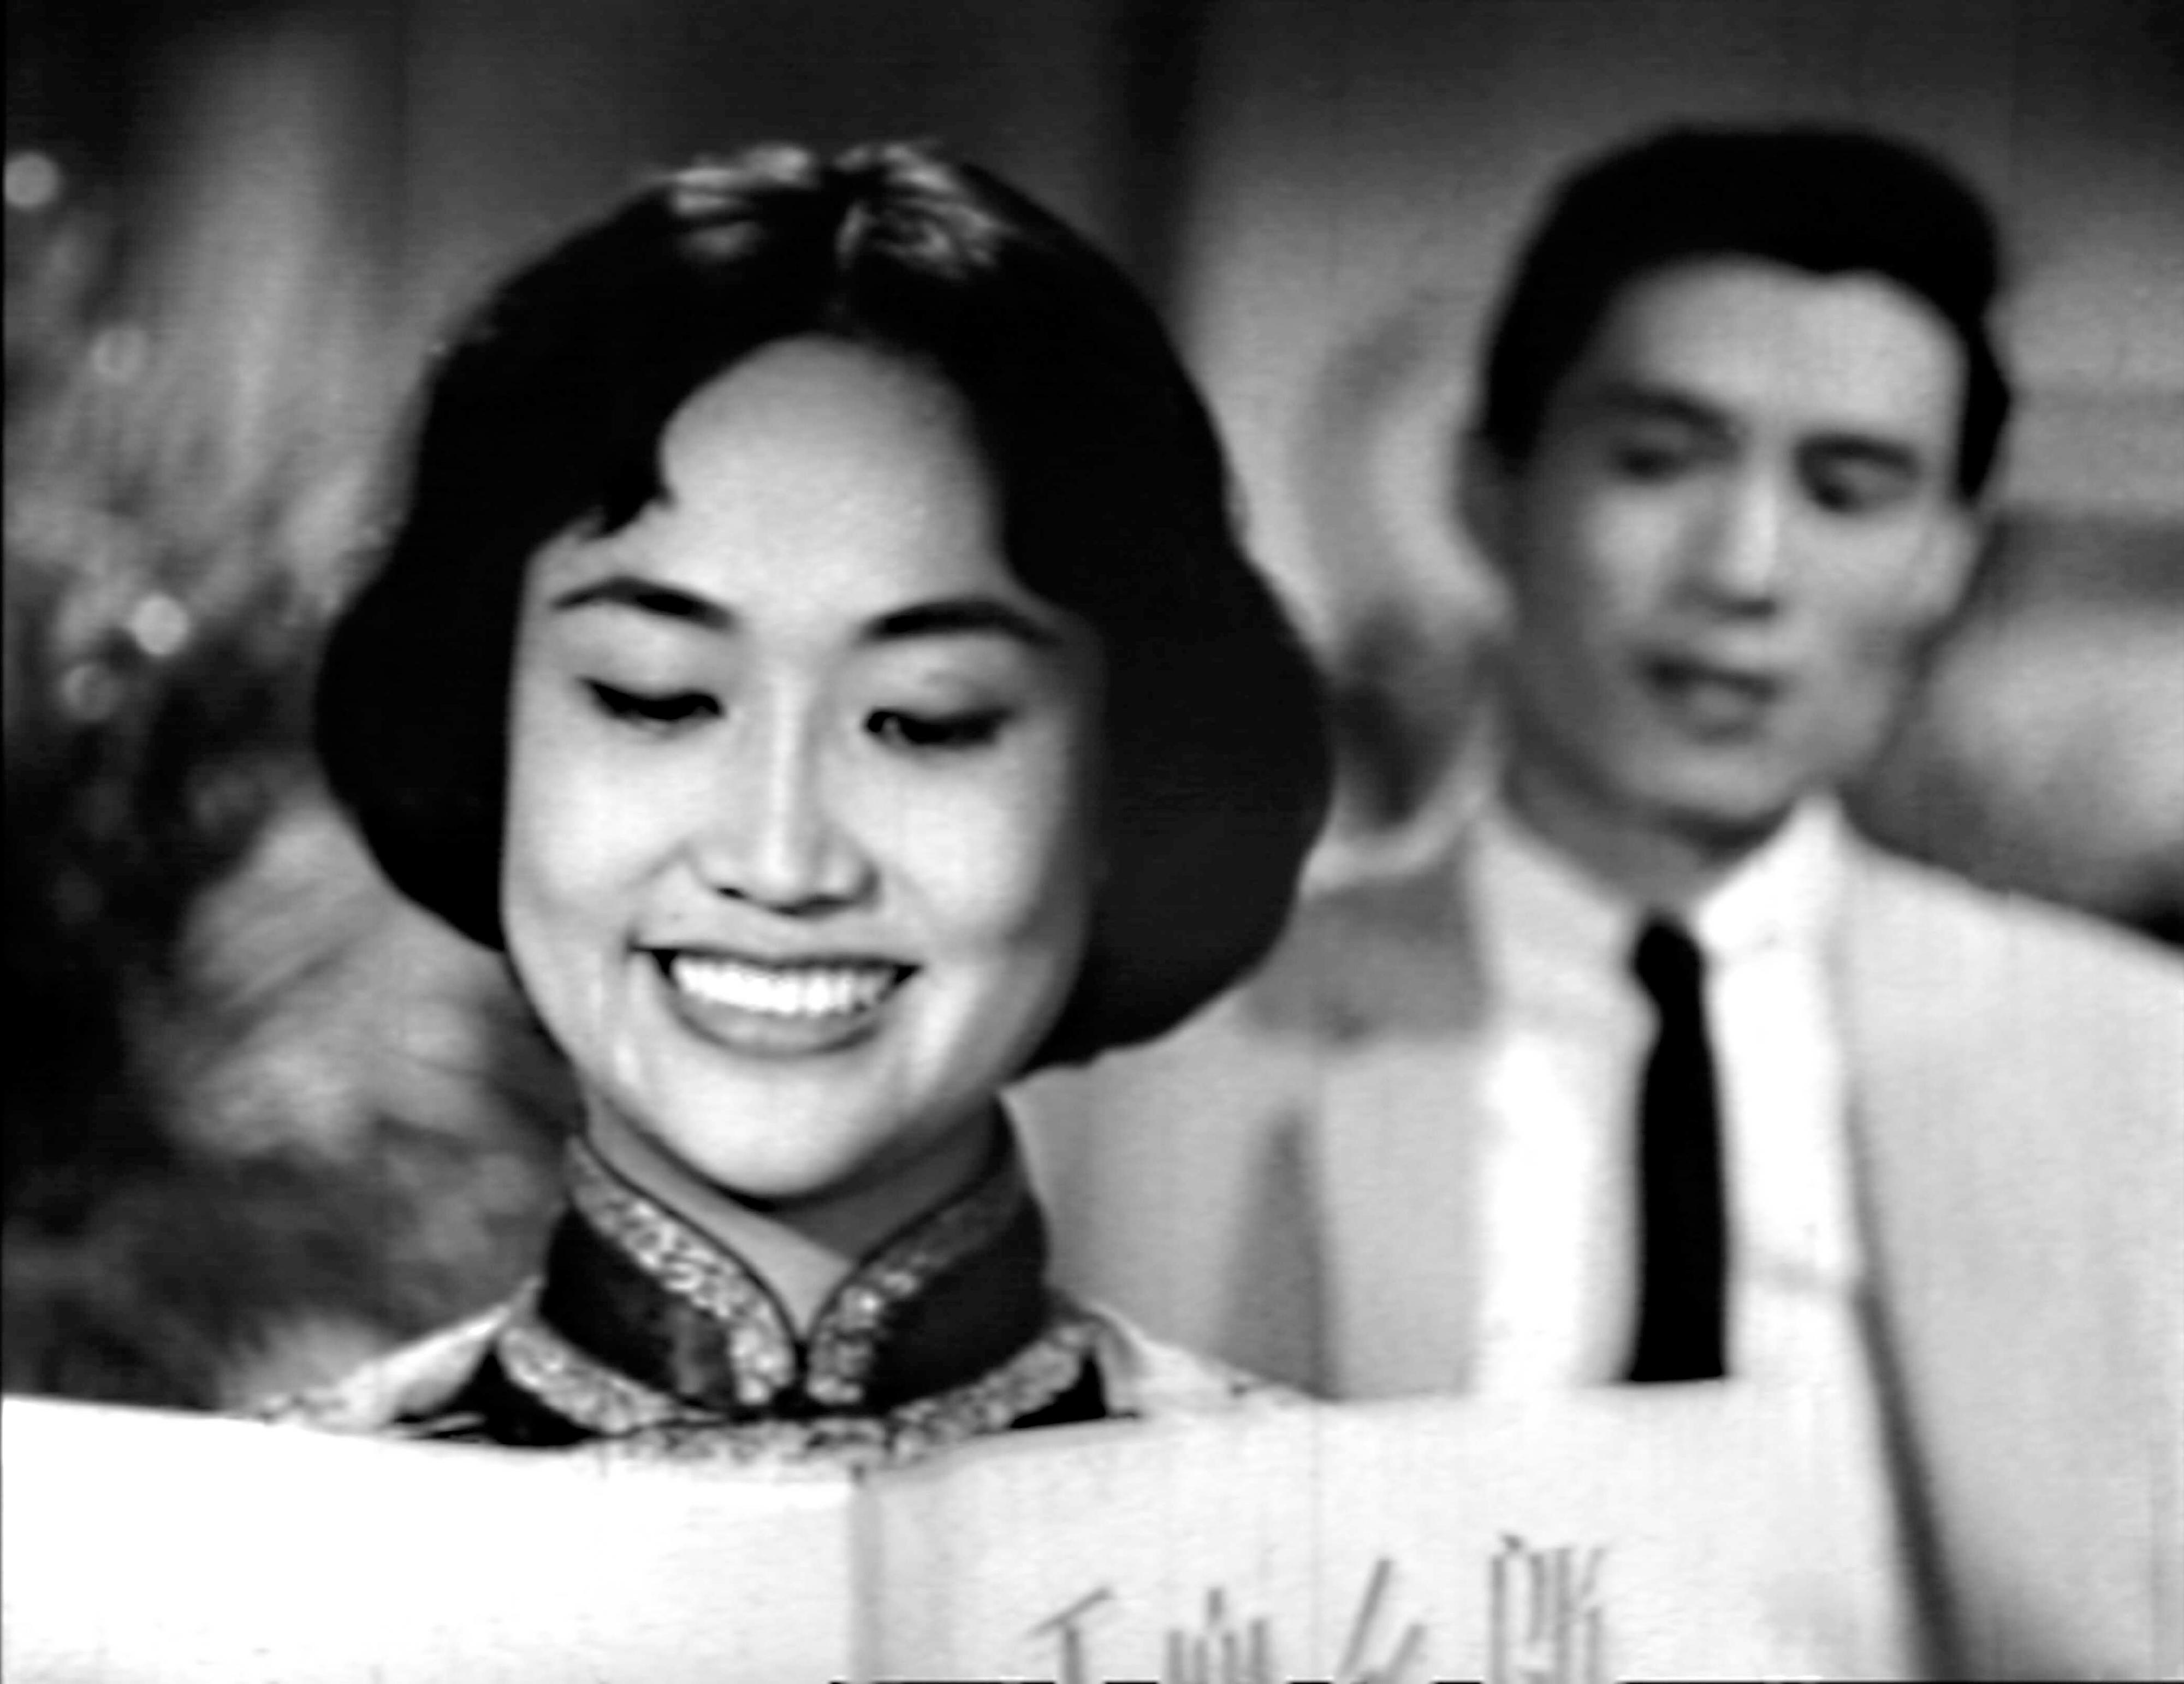 The Hong Kong Film Archive of the Leisure and Cultural Services Department will present the programme "Where Peach Blossoms Bloom" in the "Morning Matinee" from January to April next year. Fifteen cinematic classics produced by Tao Yuen Motion Picture Development Company will be screened for audiences to revisit the great works from Tao Yuen in the 1950s and the 1960s. Photo shows a film still of "The Girl with a Thousand Faces" (1959).